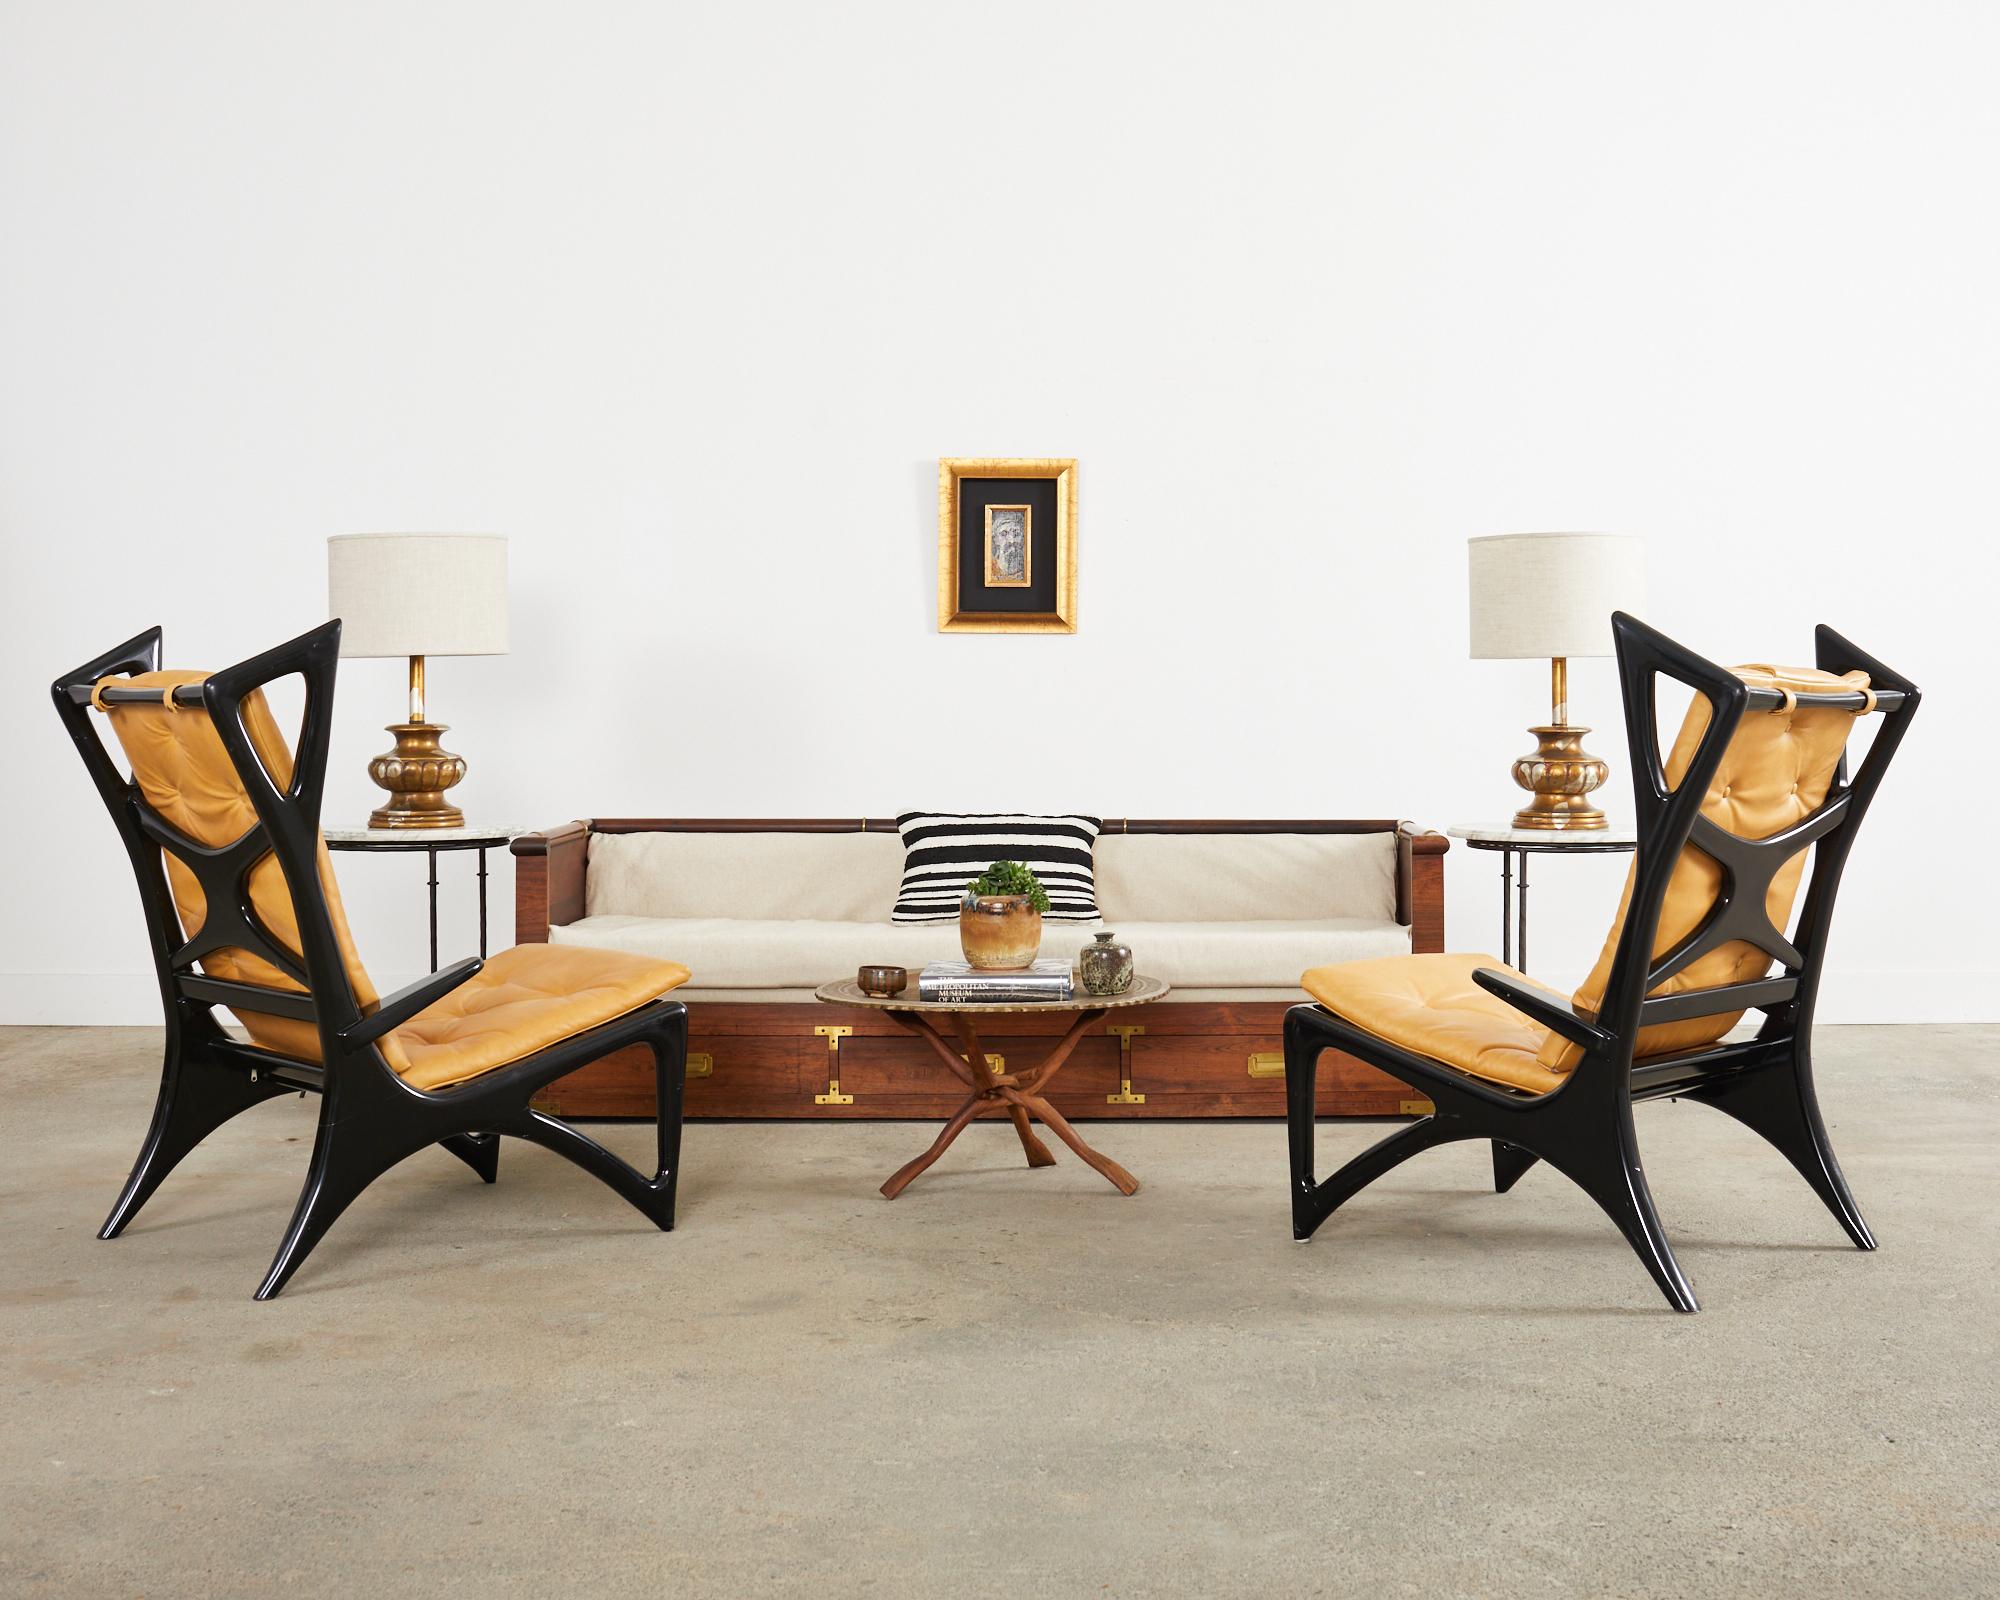 Dramatic pair of Italian Mid-Century Modern sculptural lounge chairs or wing chairs featuring a black lacquer ebonized finish. These radically redesigned wing chairs have gracefully curved frames with triangular wings and legs. The slanted ergonomic